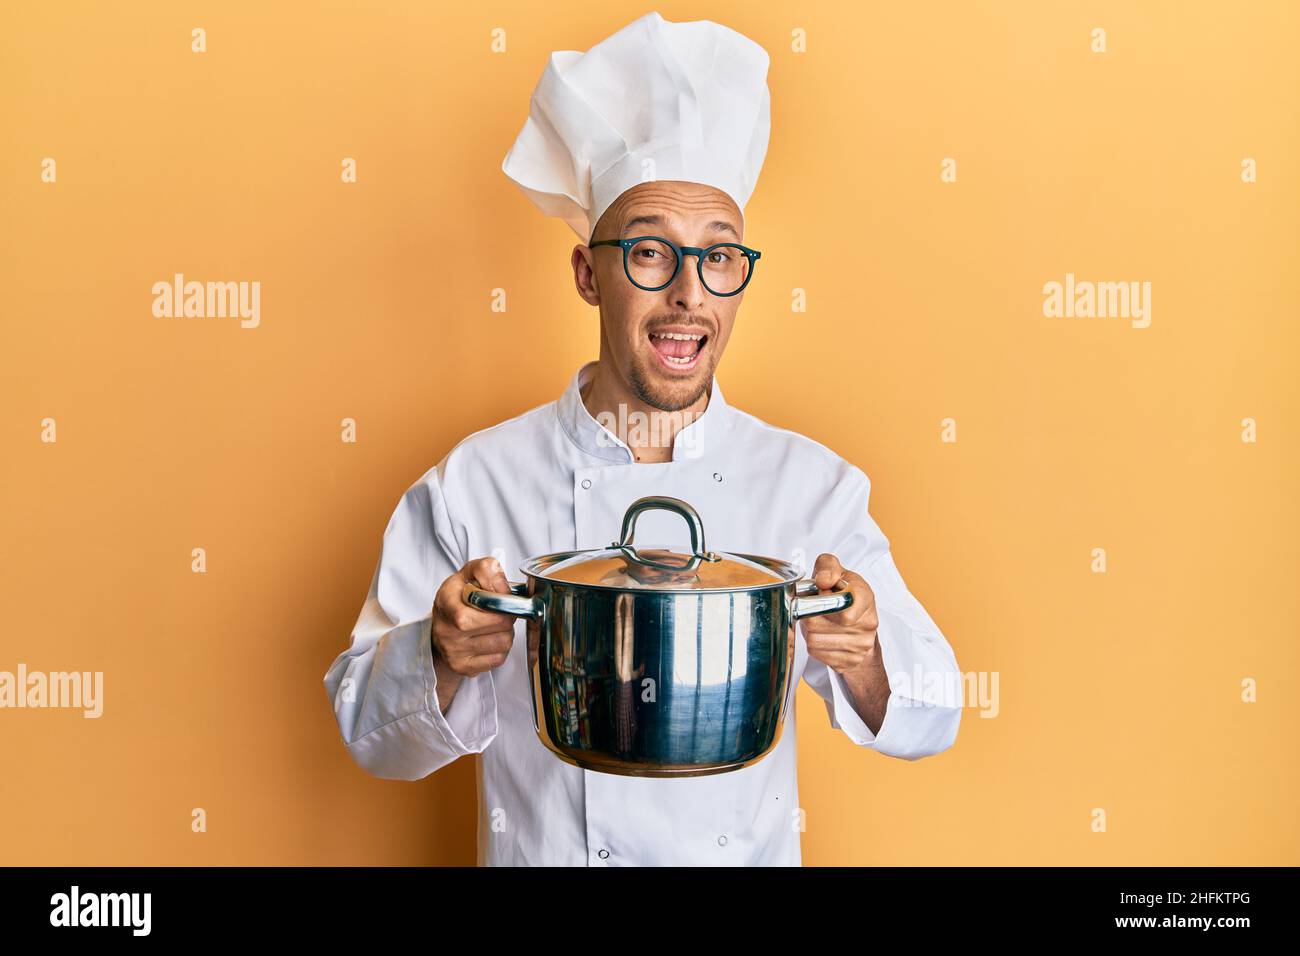 Bald man with beard wearing professional cook holding cooking pot celebrating crazy and amazed for success with open eyes screaming excited. Stock Photo